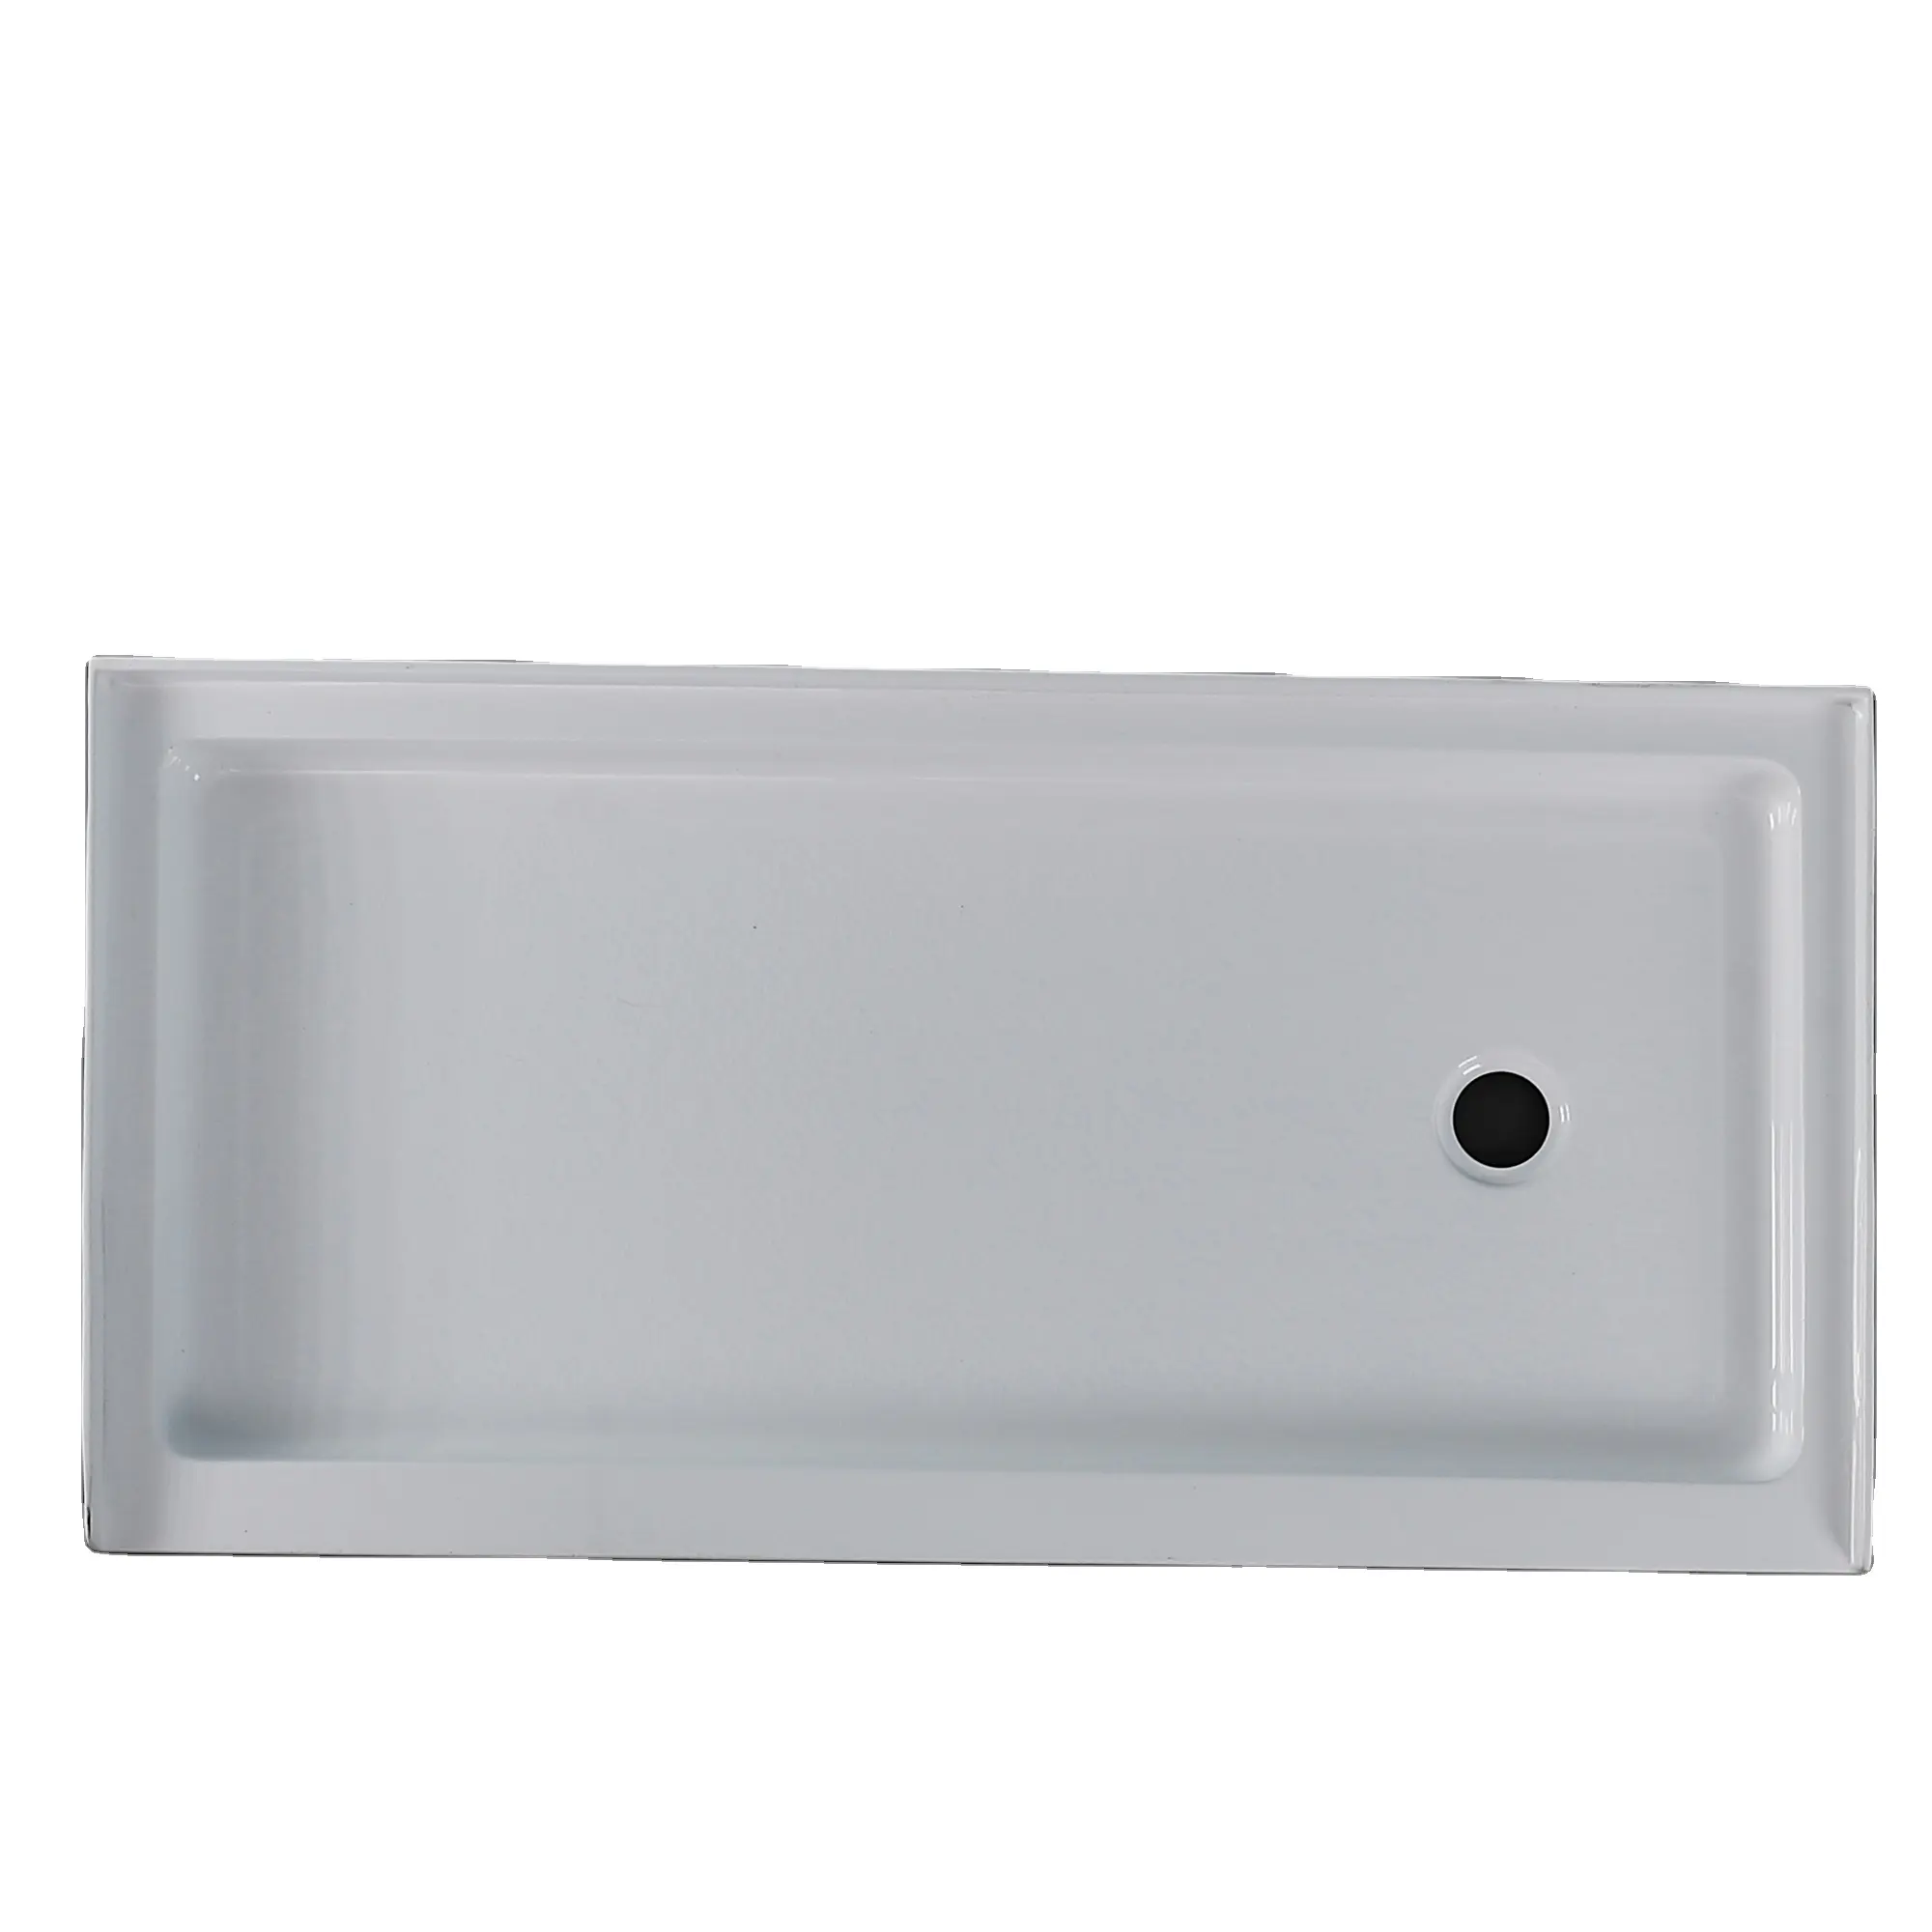 CUPC Acrylic and reinforced FRP the Best Price / Quality Custom made portable acrylic shower pan / bases / trays 60x36 inches